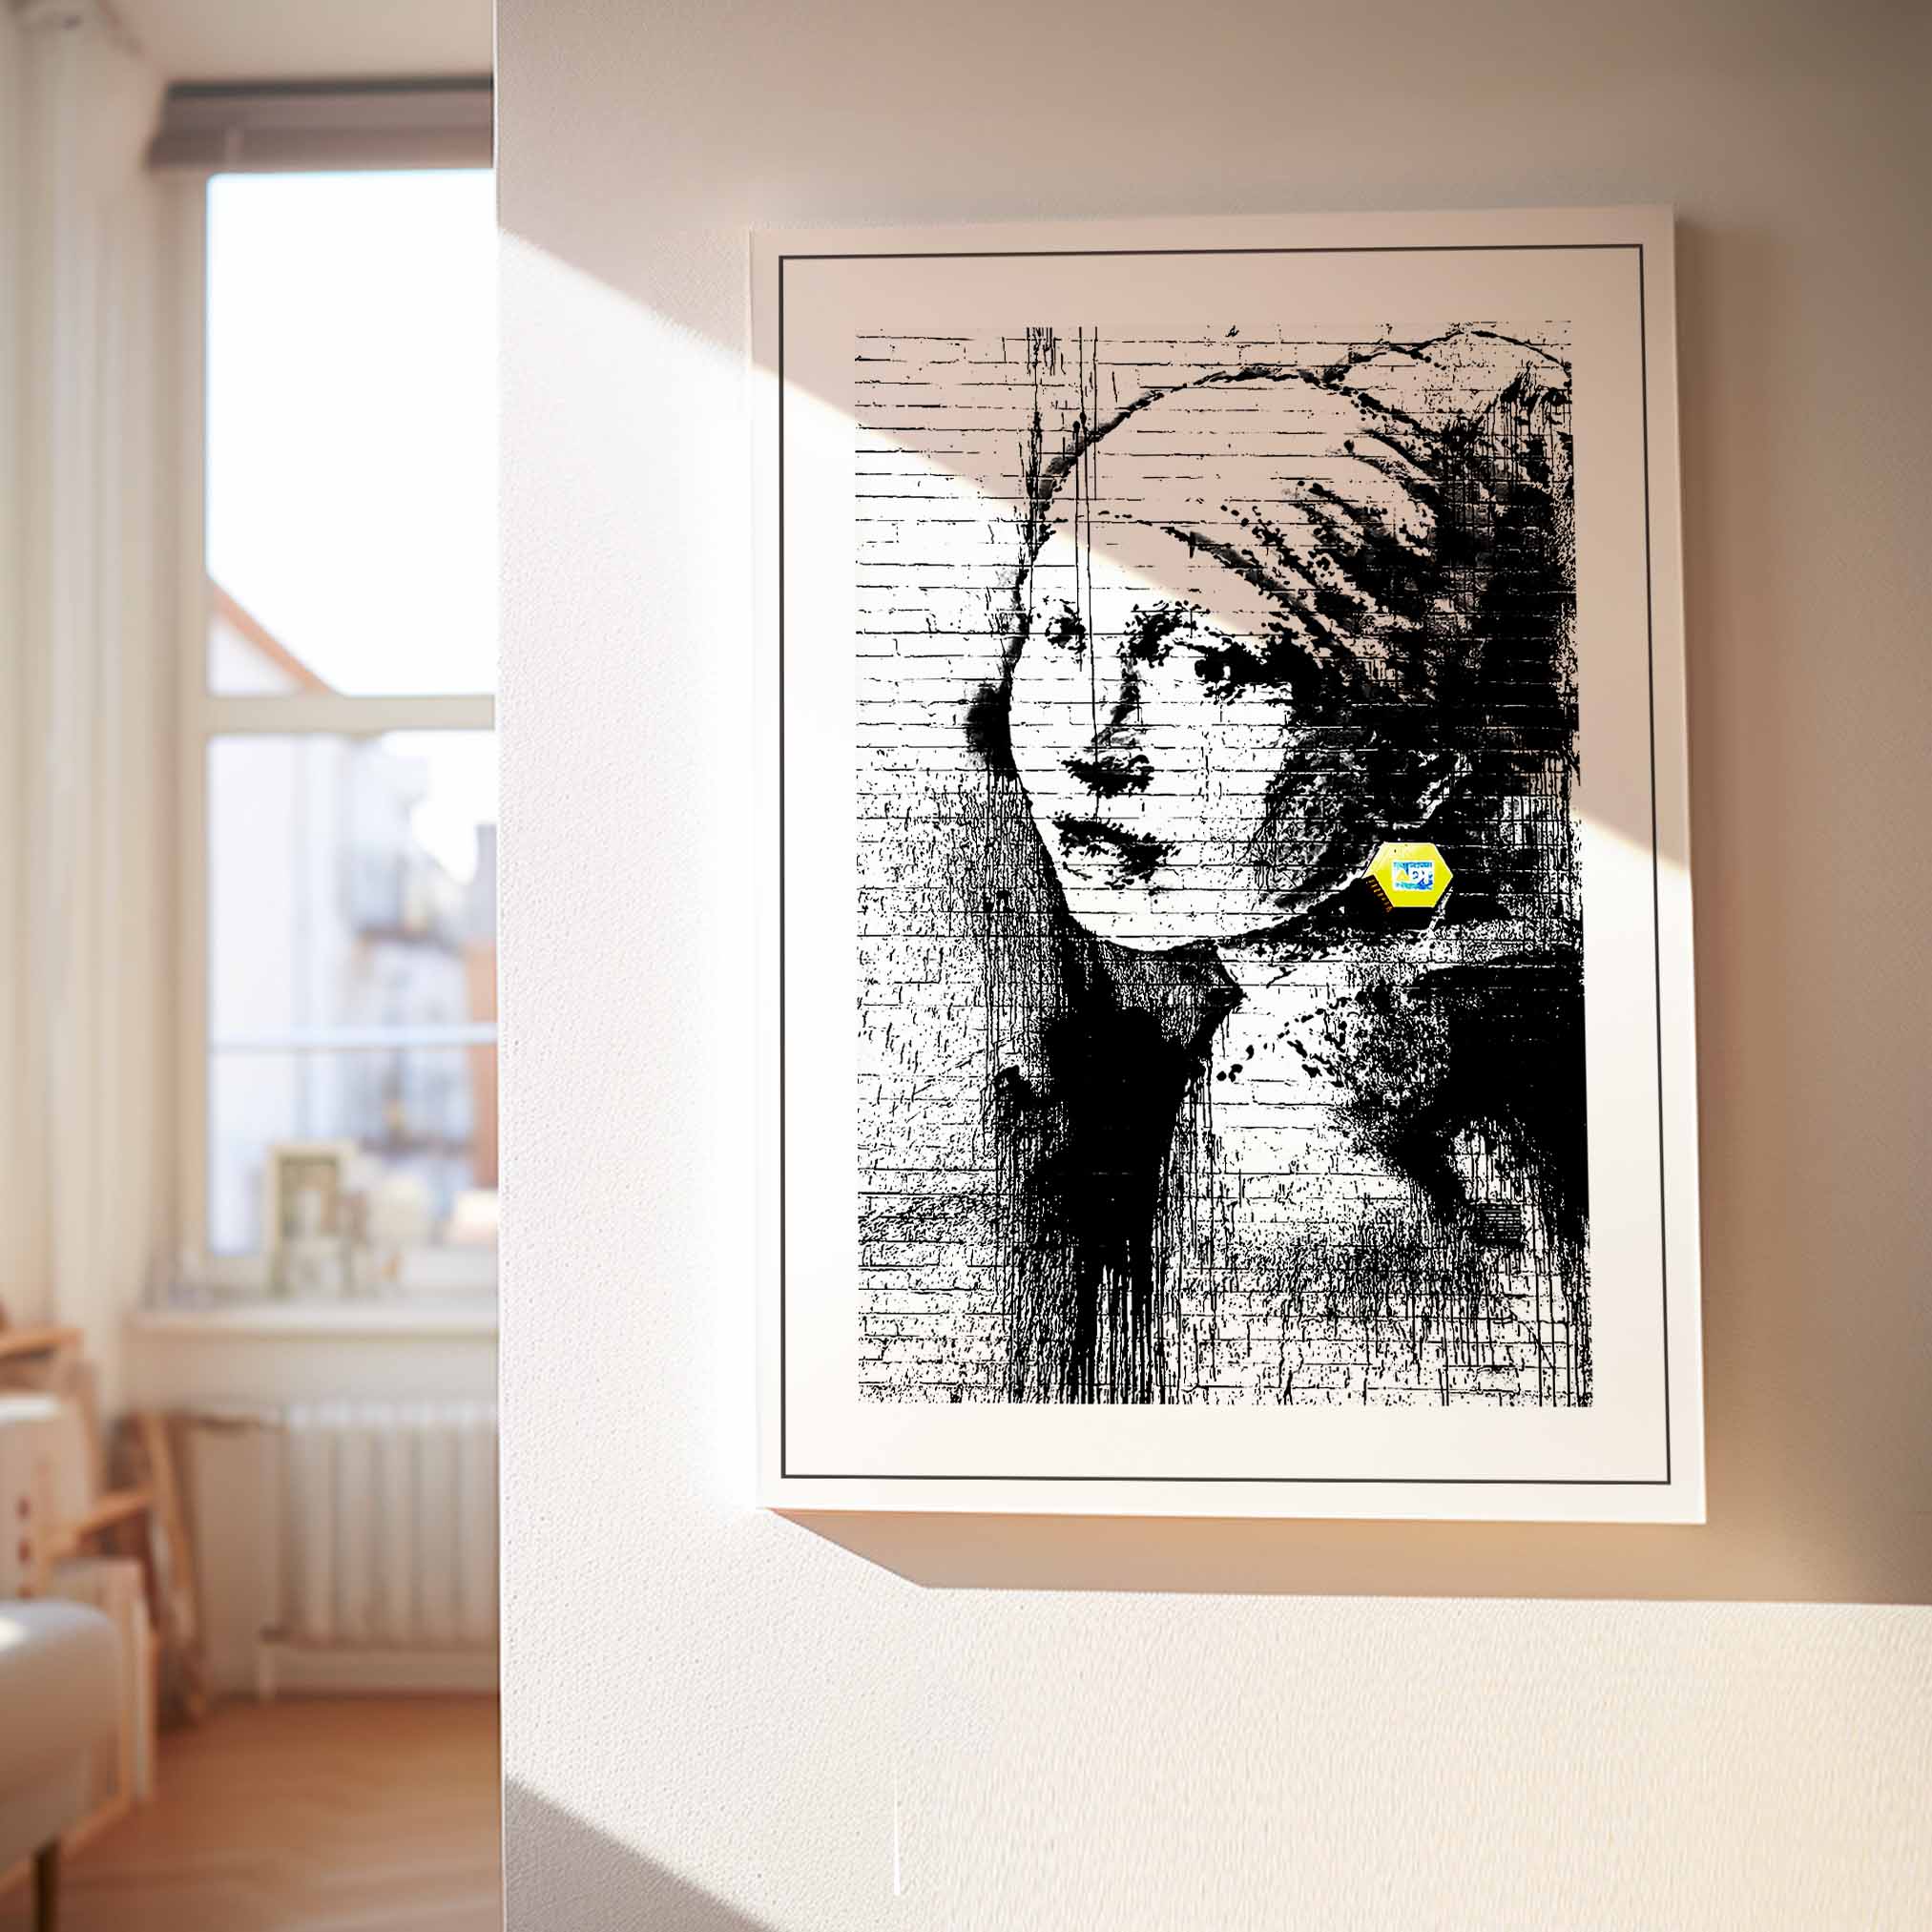 BANKSY - Girl with Pearls